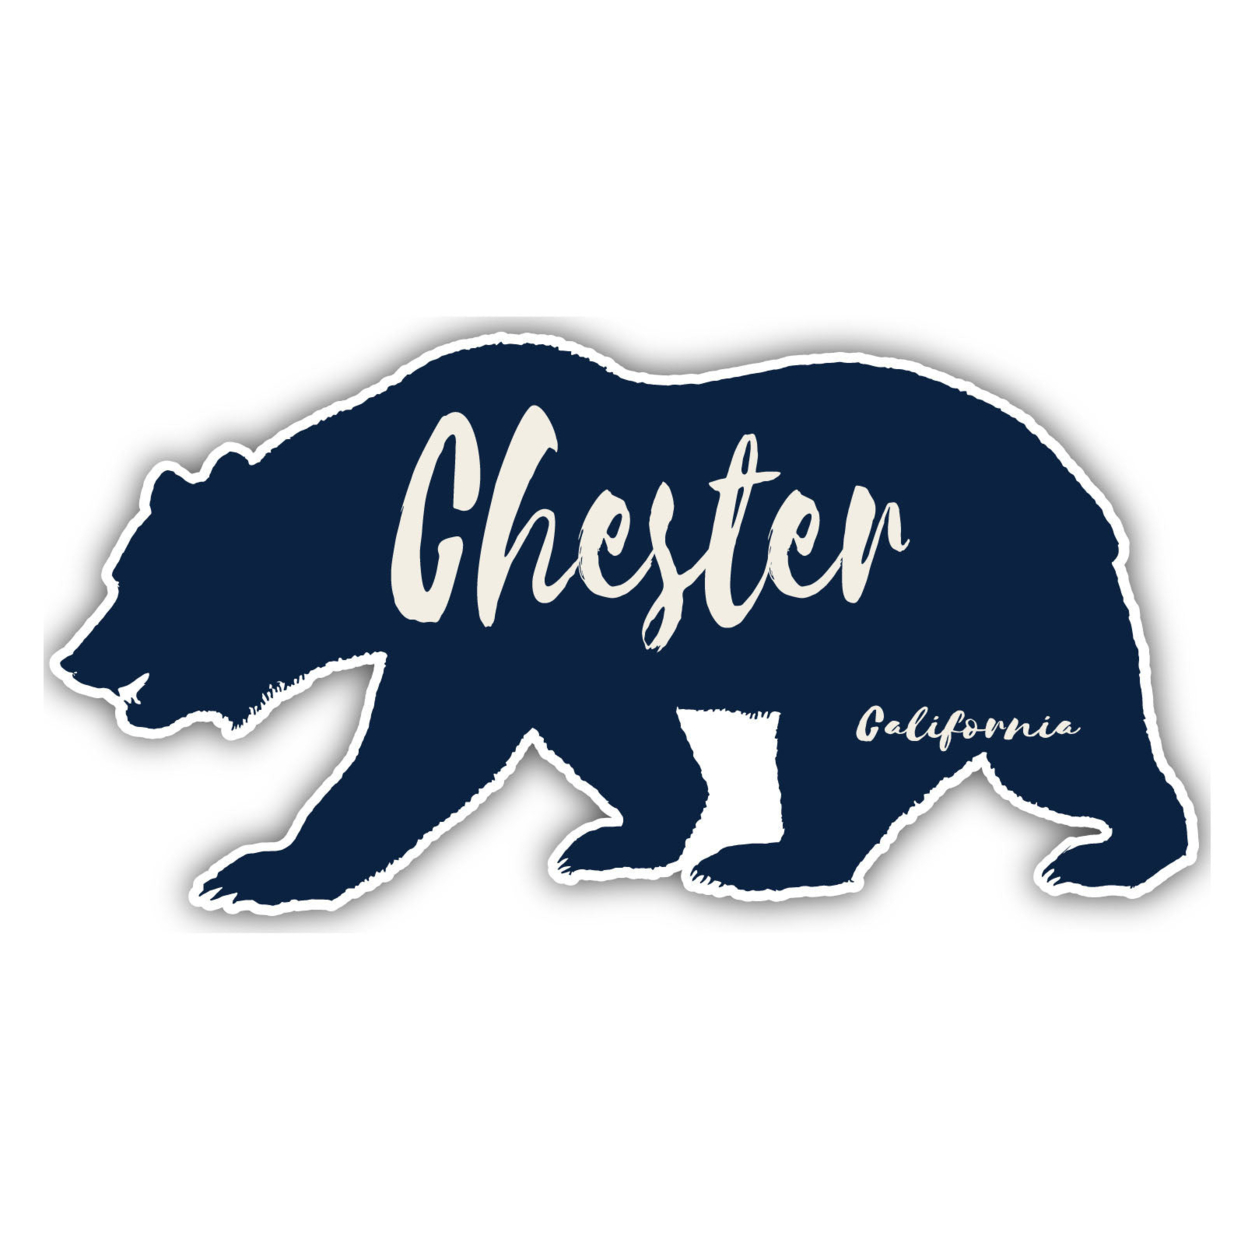 Chester California Souvenir Decorative Stickers (Choose Theme And Size) - 4-Pack, 6-Inch, Great Outdoors